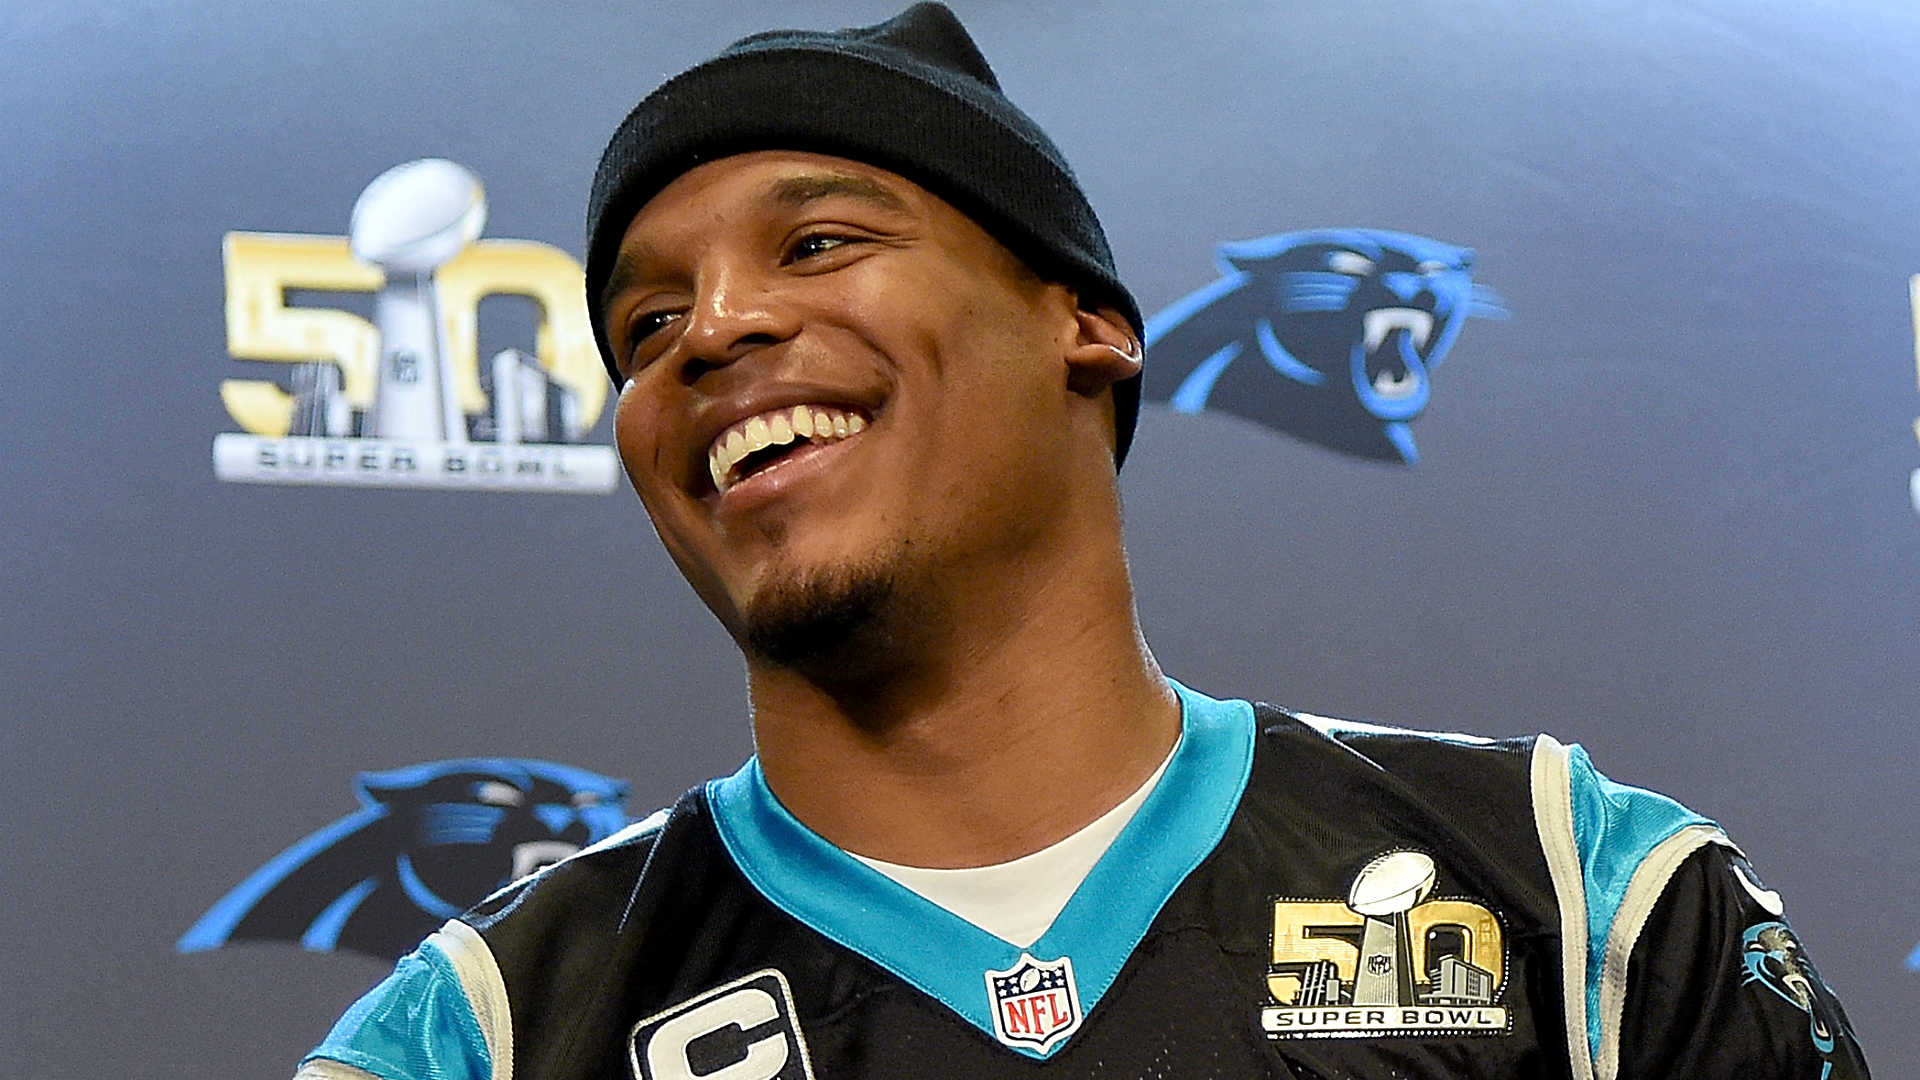 HD wallpaper of Cam Newton smiling at an event, wearing a Carolina Panthers jersey, with a Super Bowl 50 logo in the background.